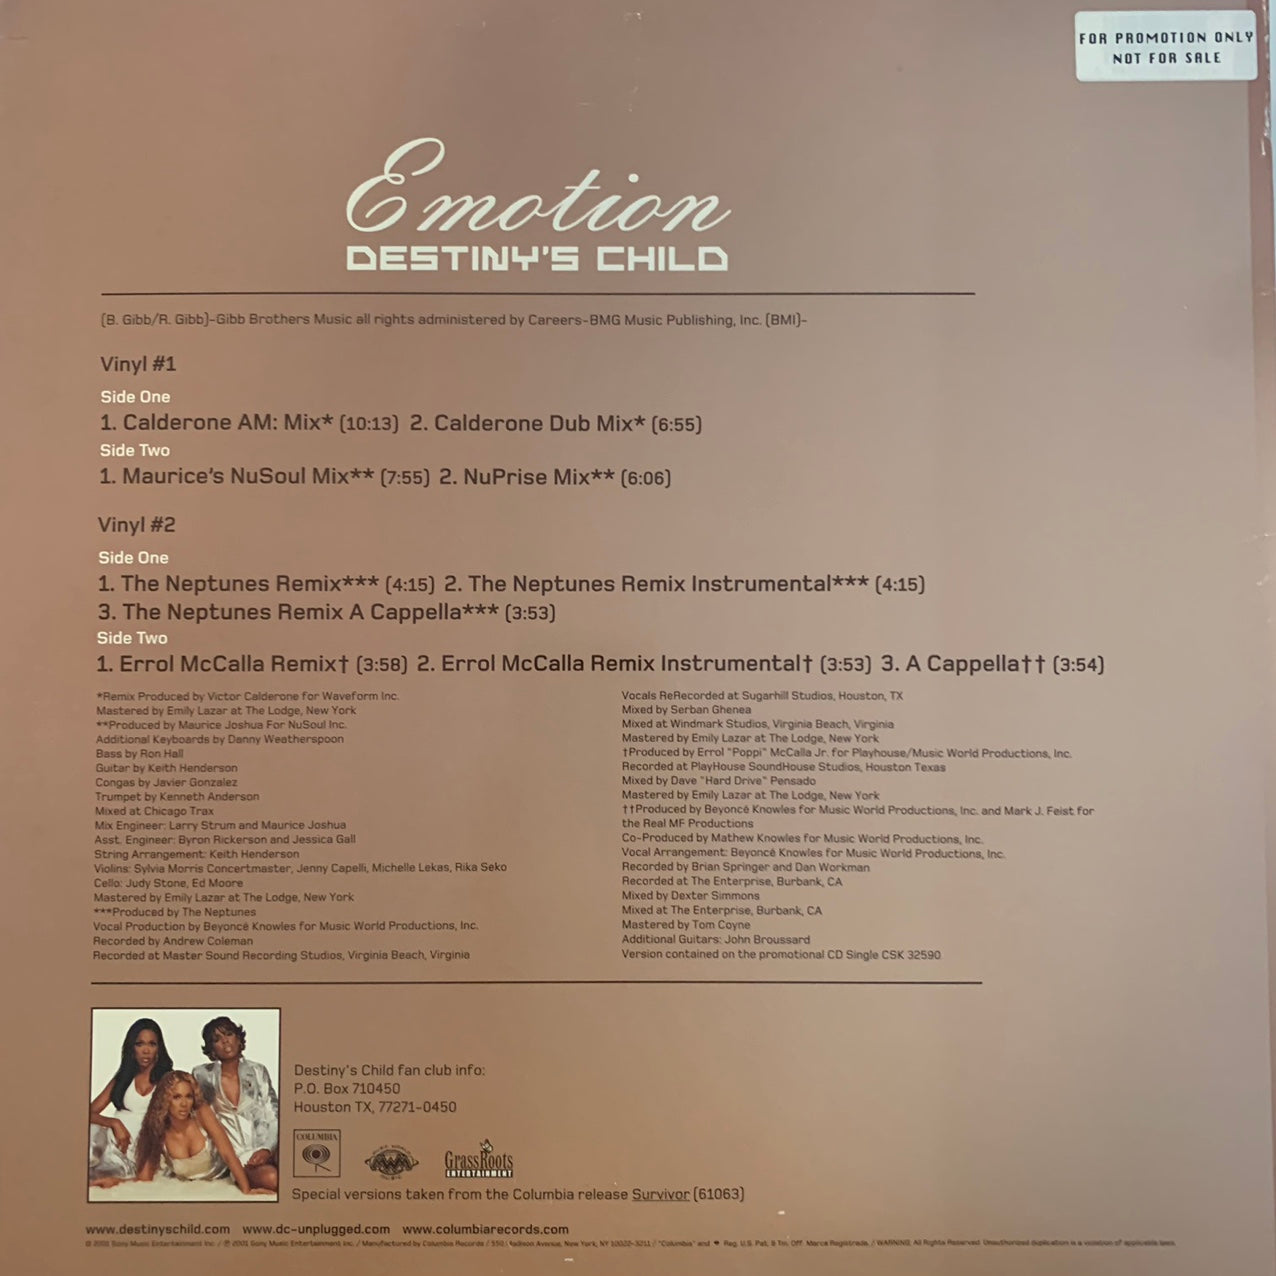 Destiny’s Child “Emotion” 2 X 12inch Double Pack Vinyl, Featuring mixes from The Neptune’s